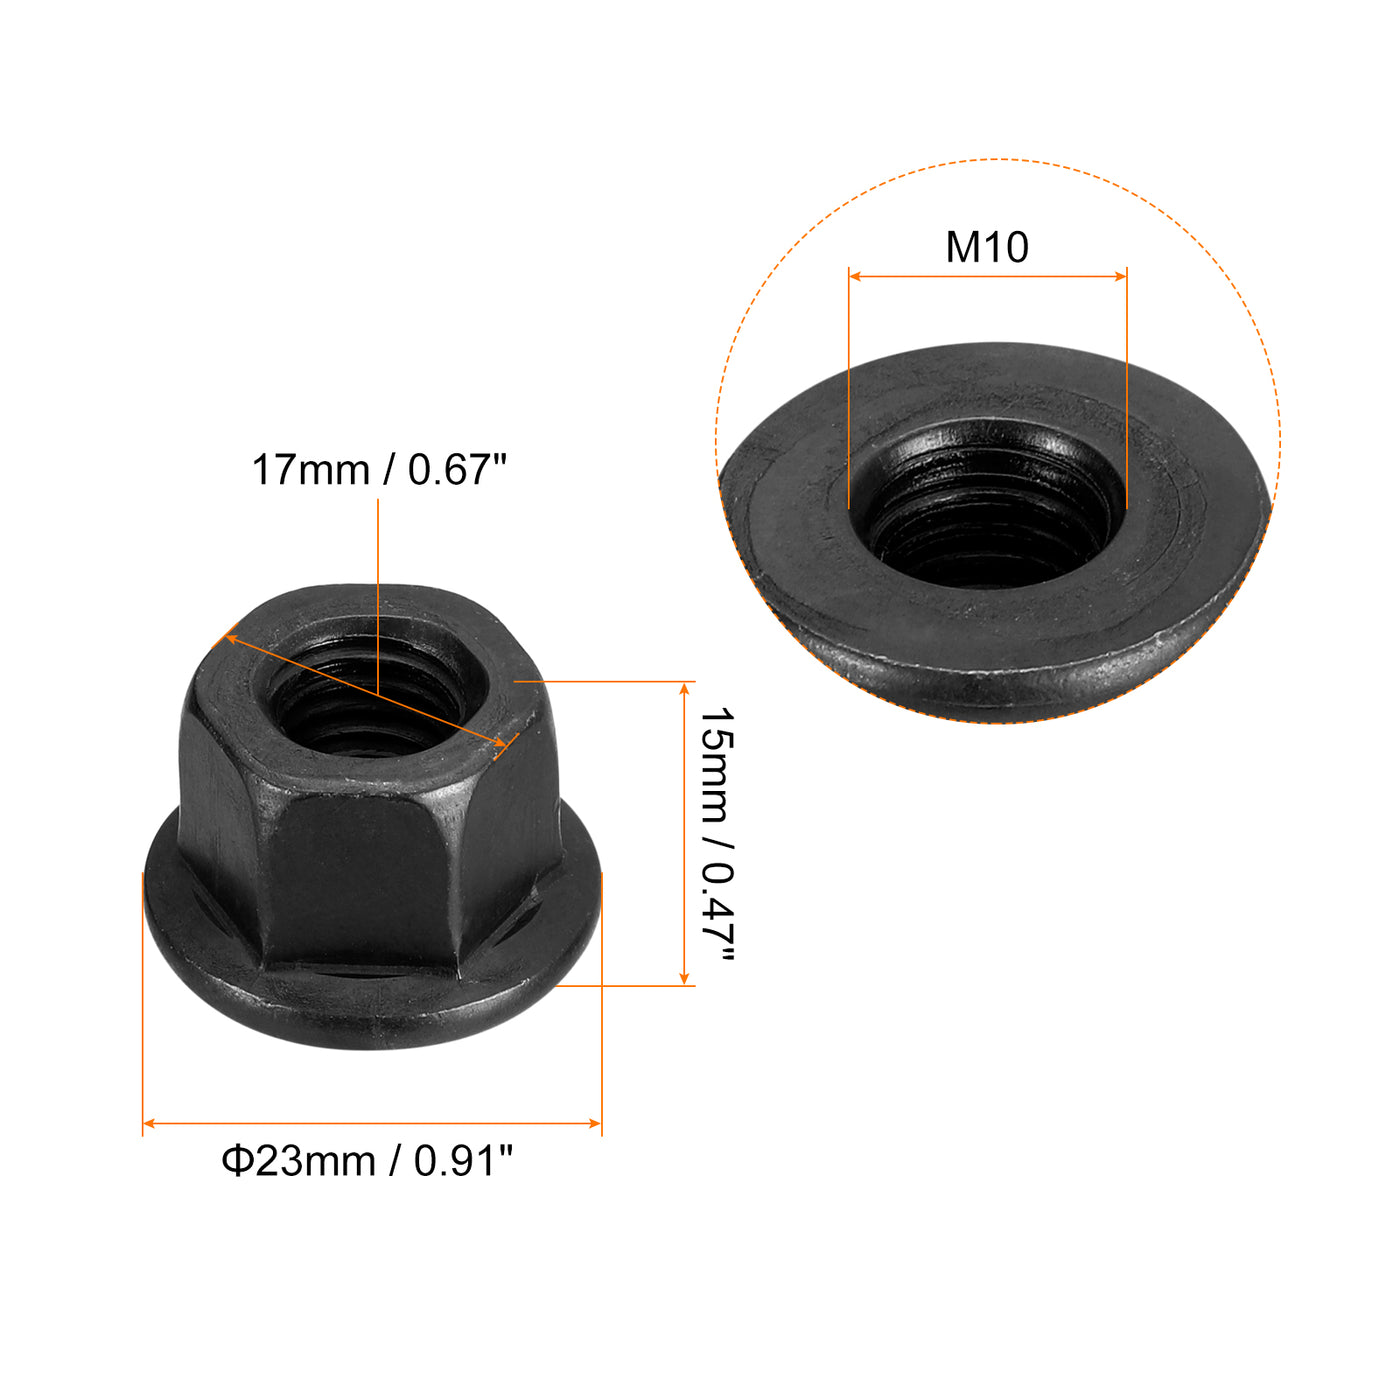 uxcell Uxcell M10 Flange Hex Lock Nuts, 2pcs Grade 10.9 Carbon Steel Hex Flange Nuts